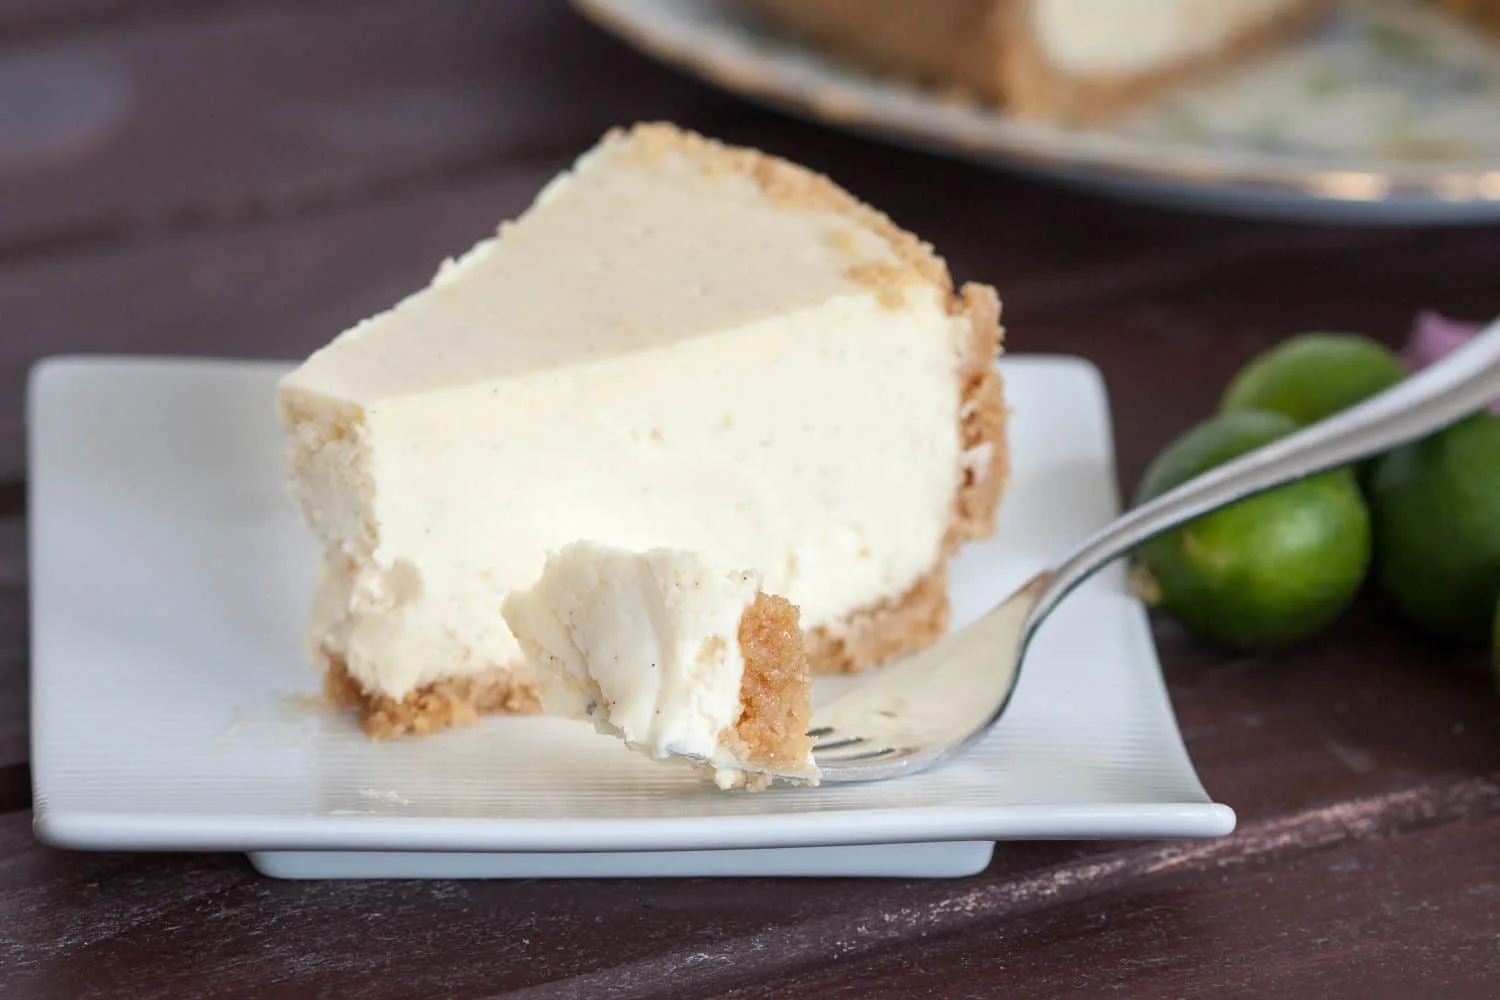 New York style key lime cheesecake recipe. Creamy without being heavy, with just the perfect touch of key lime flavor! Get the recipe on GoodieGodmother.com